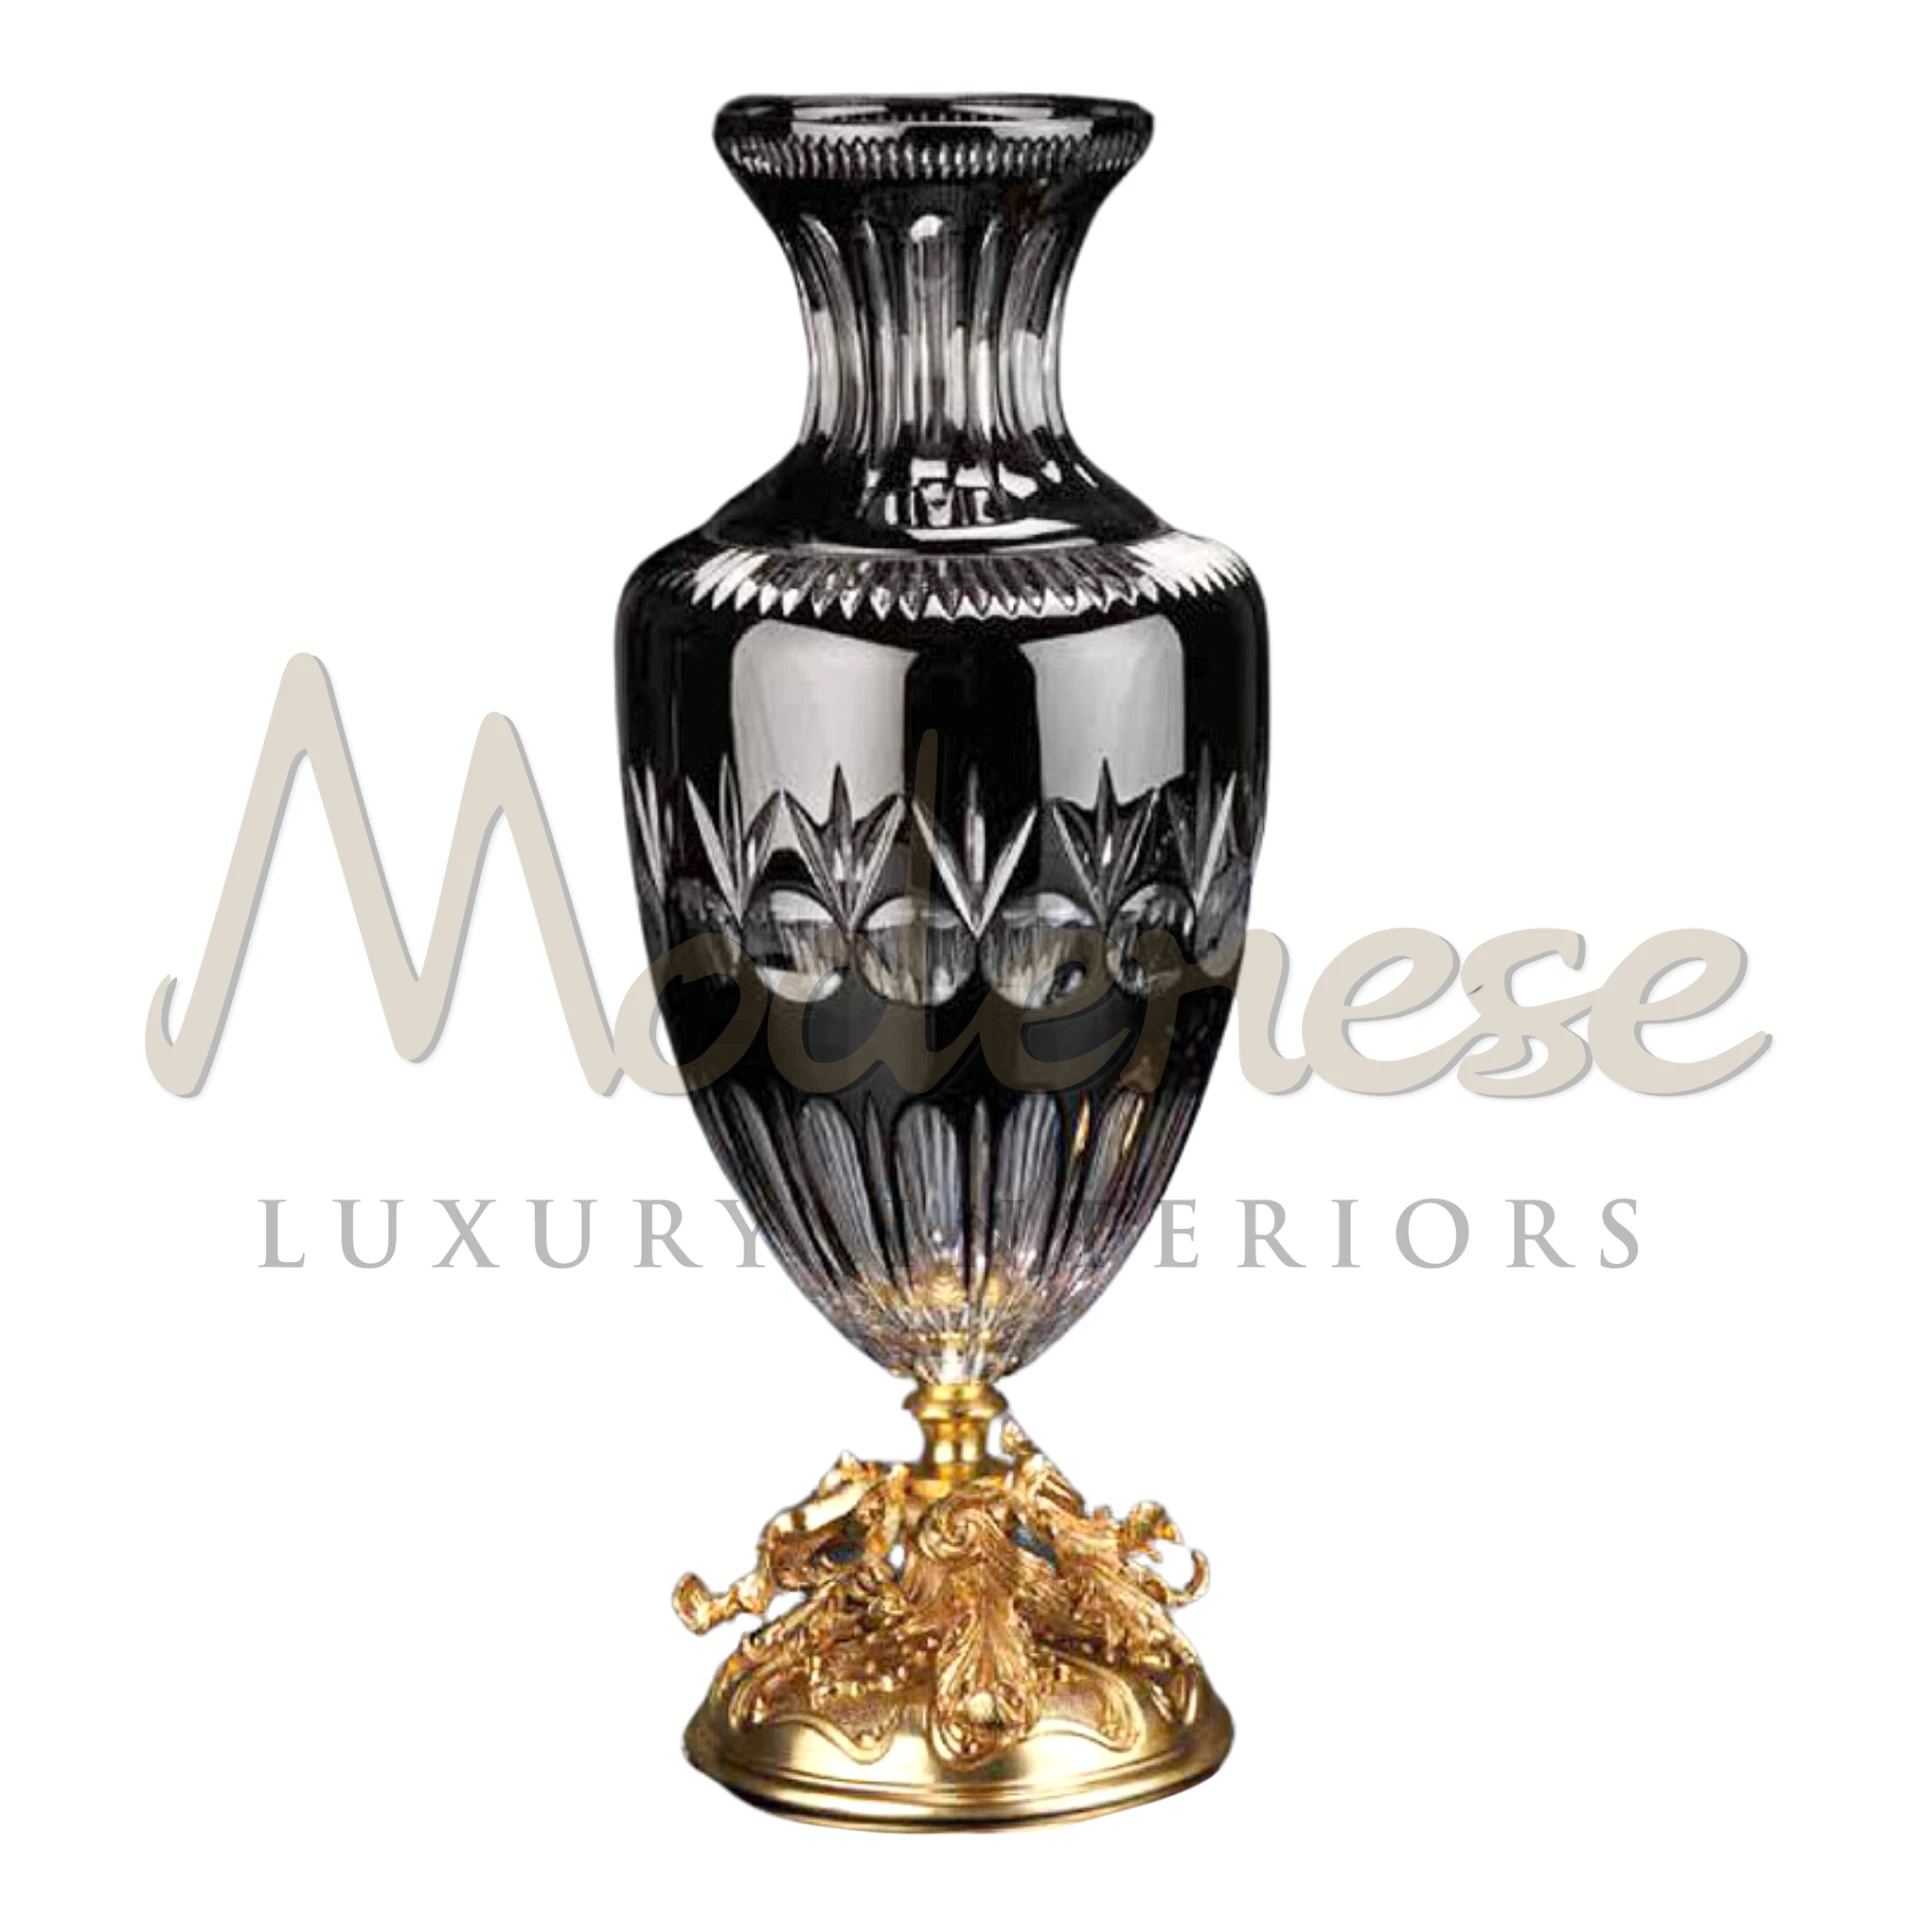 Luxury Tall Black Vase, combining modernity and elegance in glass, ceramic, or porcelain, ideal for adding sophisticated luxury to any upscale interior design.






